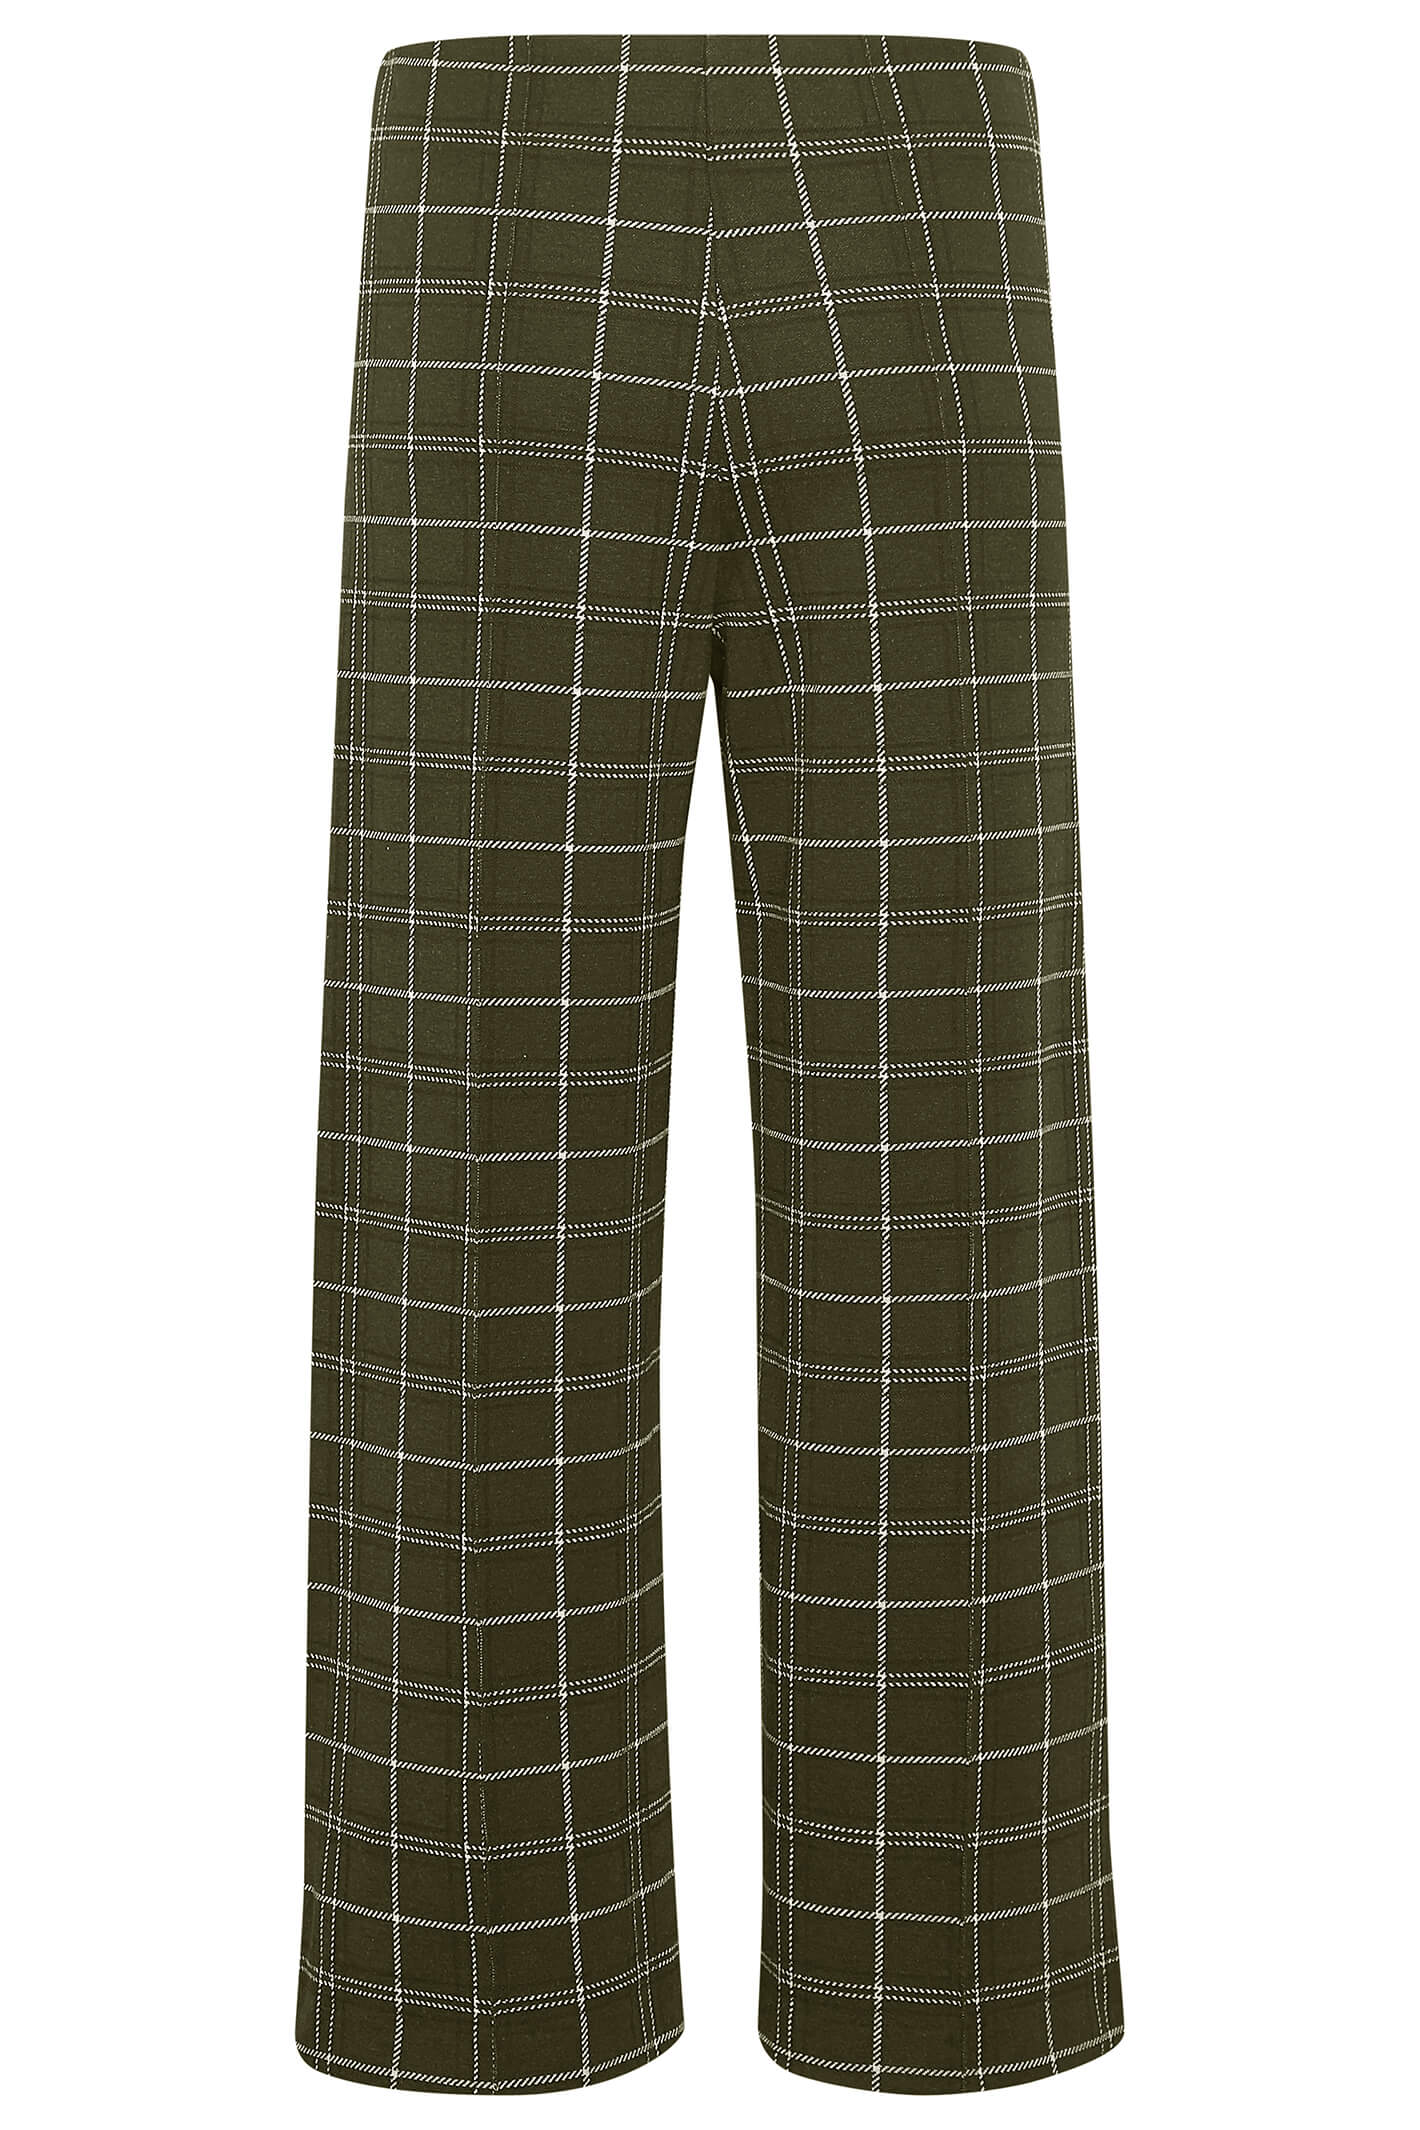 L'AGENCE Livvy Straight-Leg Trouser in Pink/Black Houndstooth